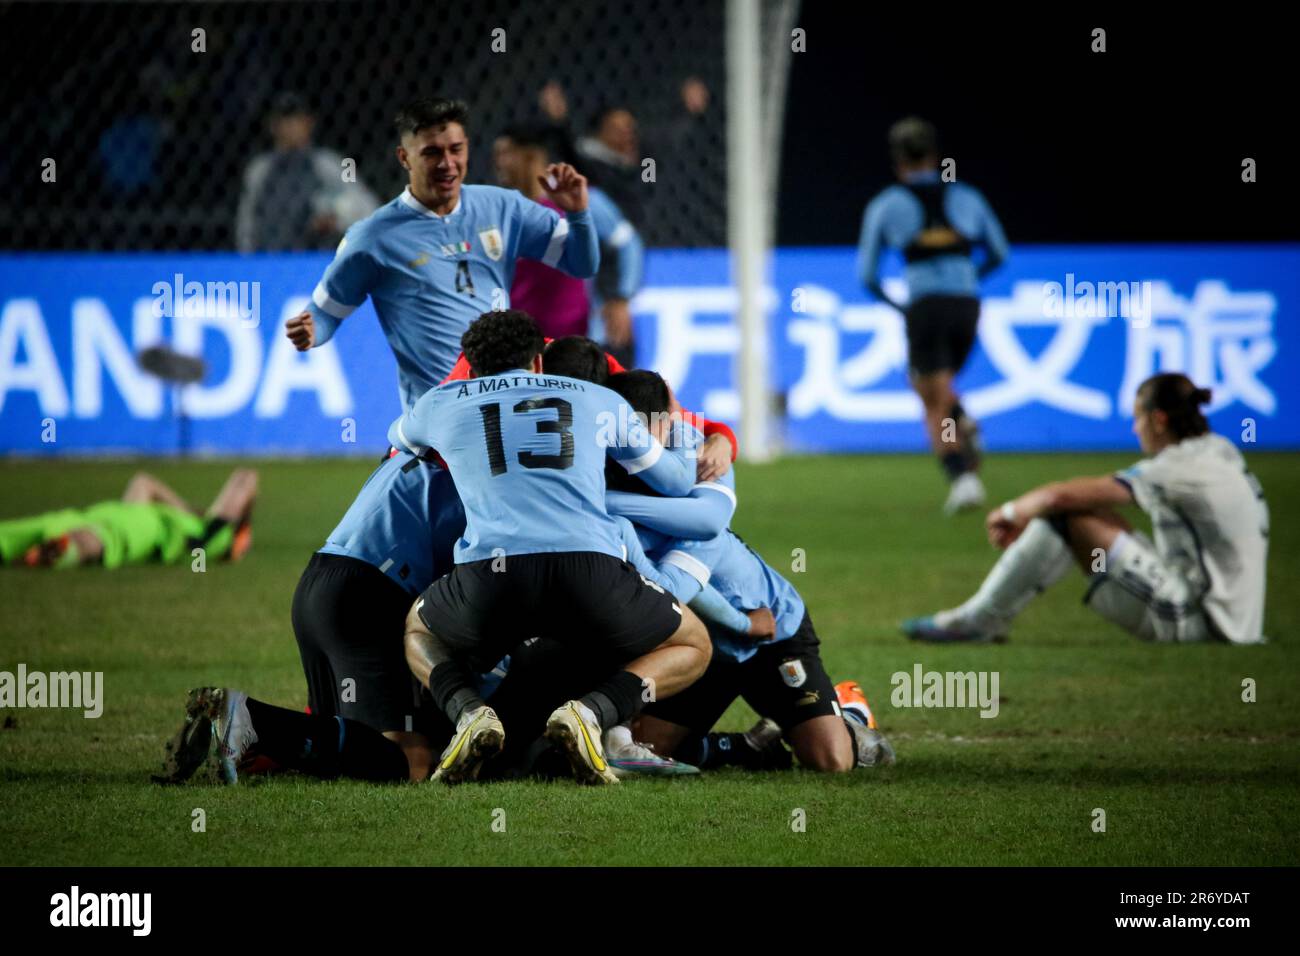 La Plata, Argentina. 11th June, 2023. Uruguay national team celebrates their victory after the match between Uruguay vs Italia as part of World Cup u20 Argentina 2023 - Final Match at Estadio Unico 'Diego Armando Maradona'. Final score: Uruguay 1 - 0 Italia (Photo by Roberto Tuero/SOPA Images/Sipa USA) Credit: Sipa USA/Alamy Live News Stock Photo